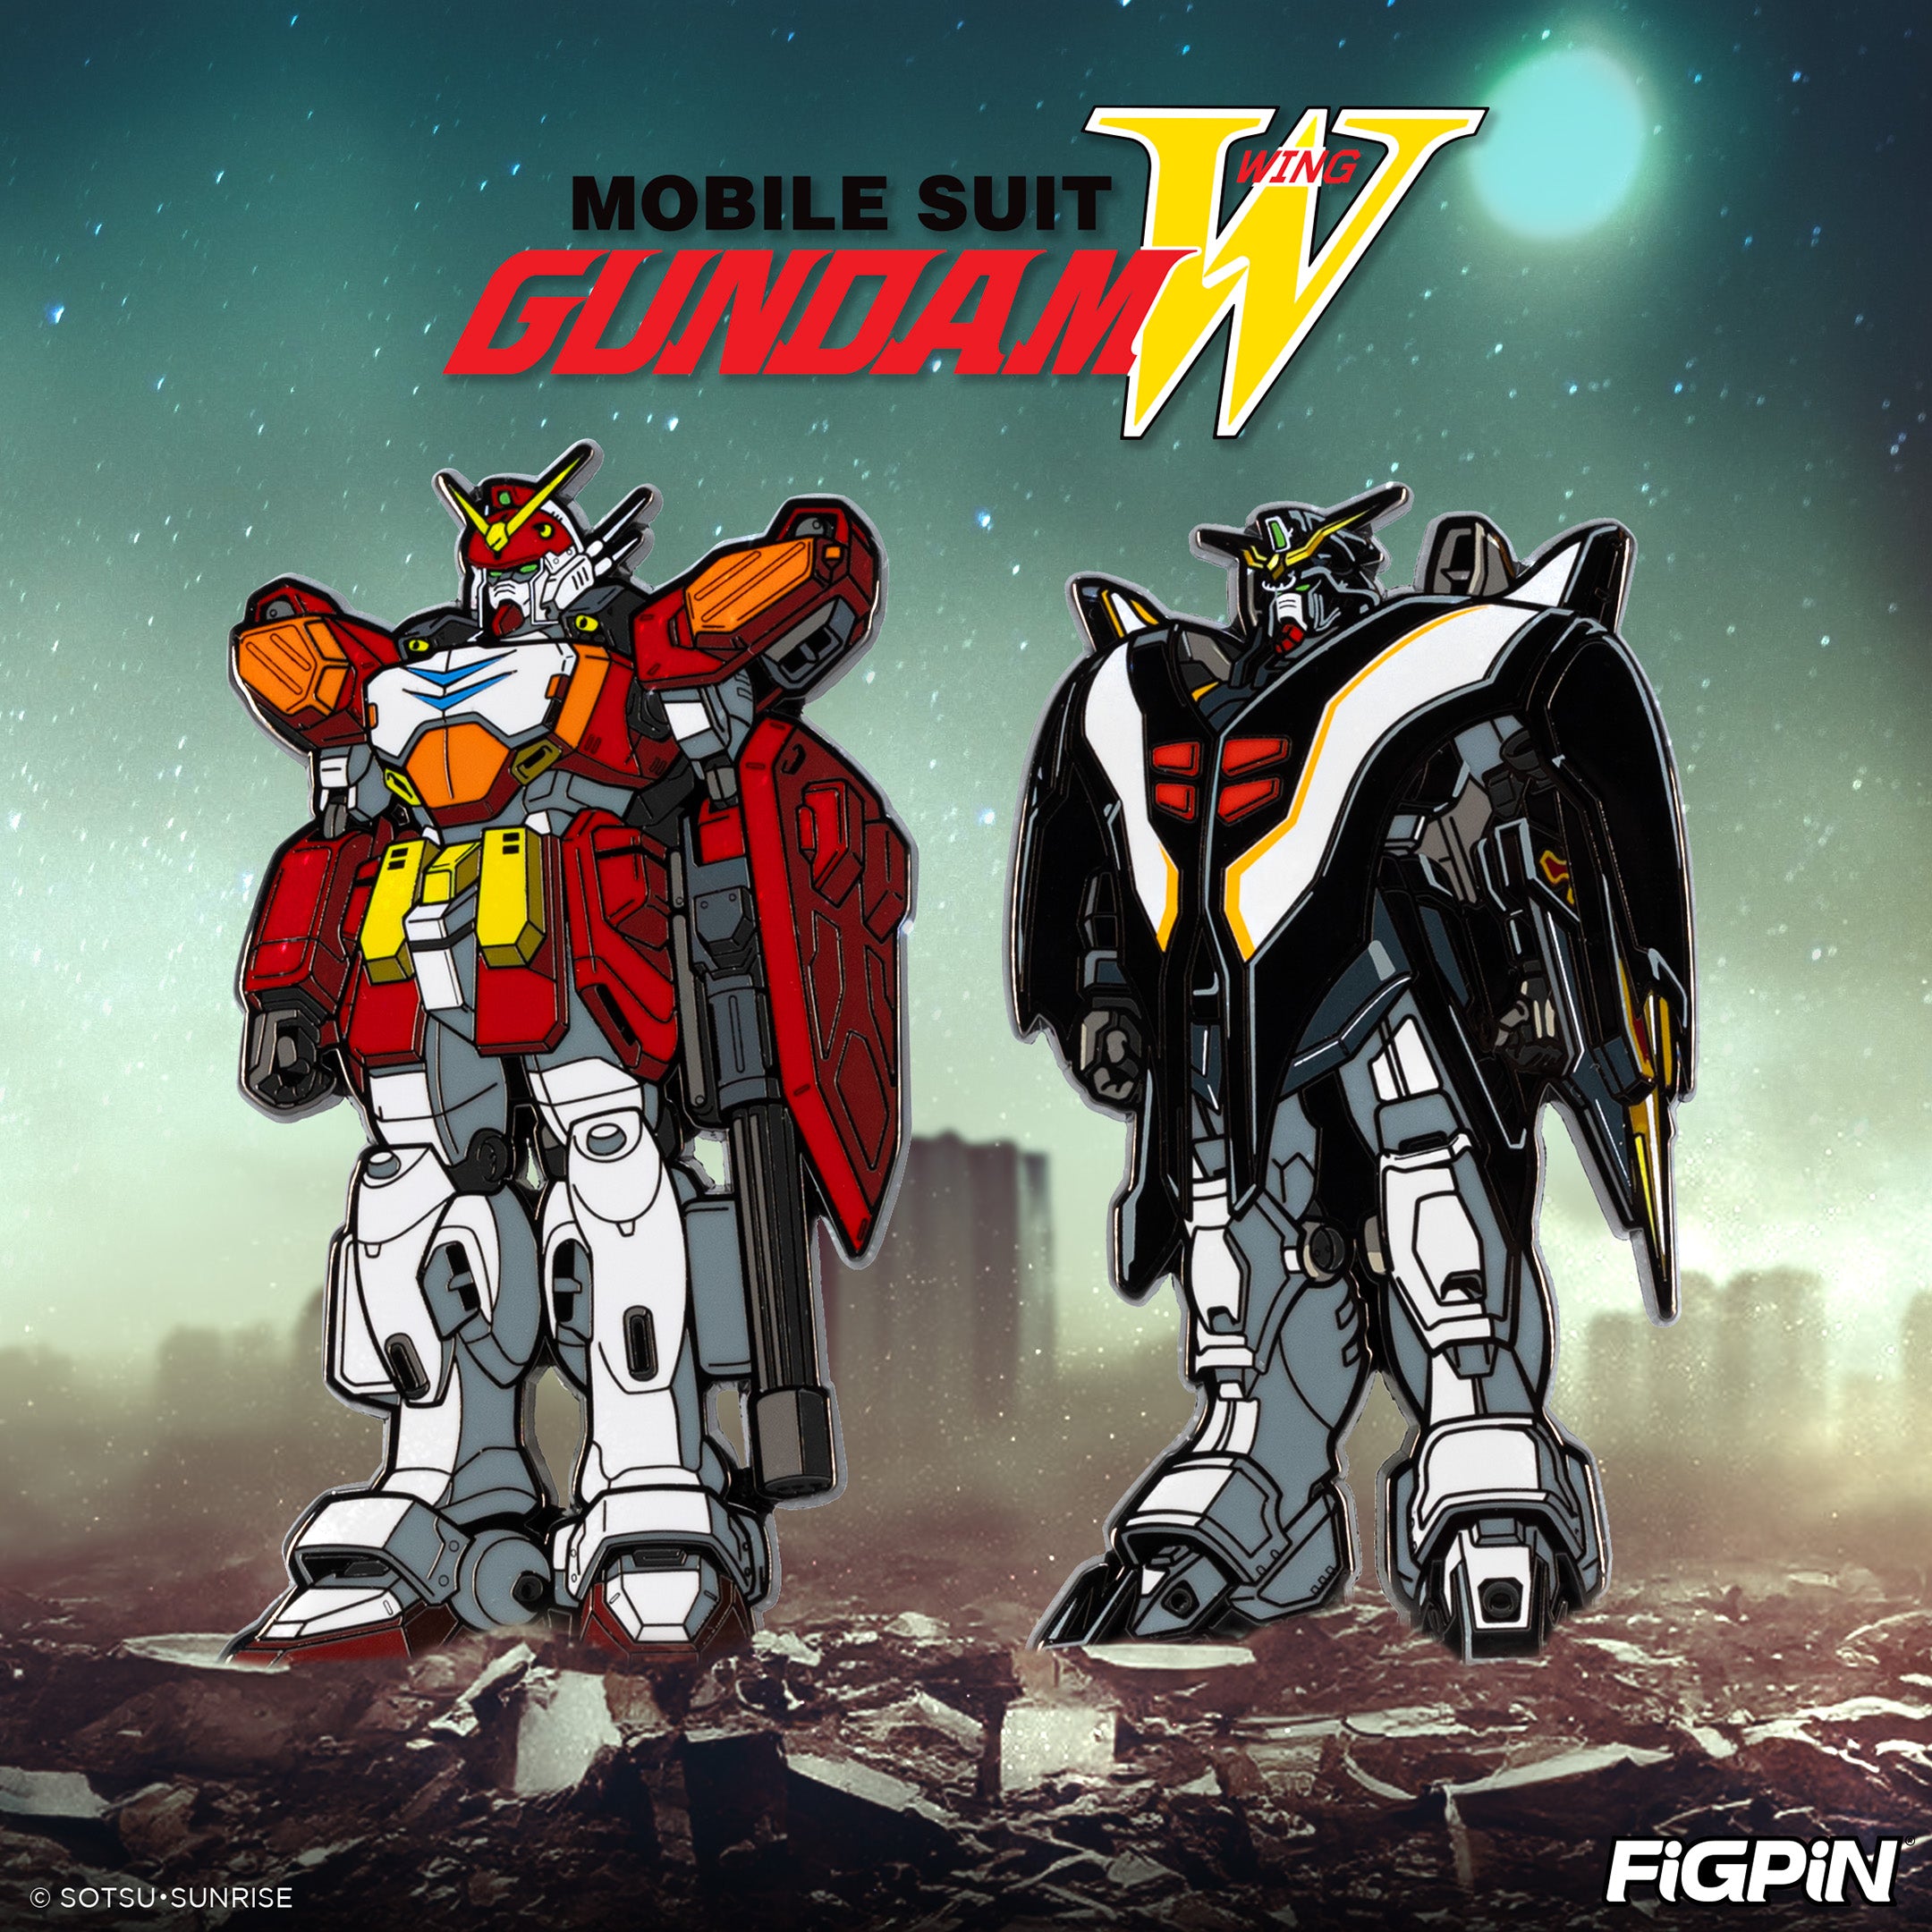 Photograph of Gundam characters available as enamel pins in this Gundam FiGPiN wave release